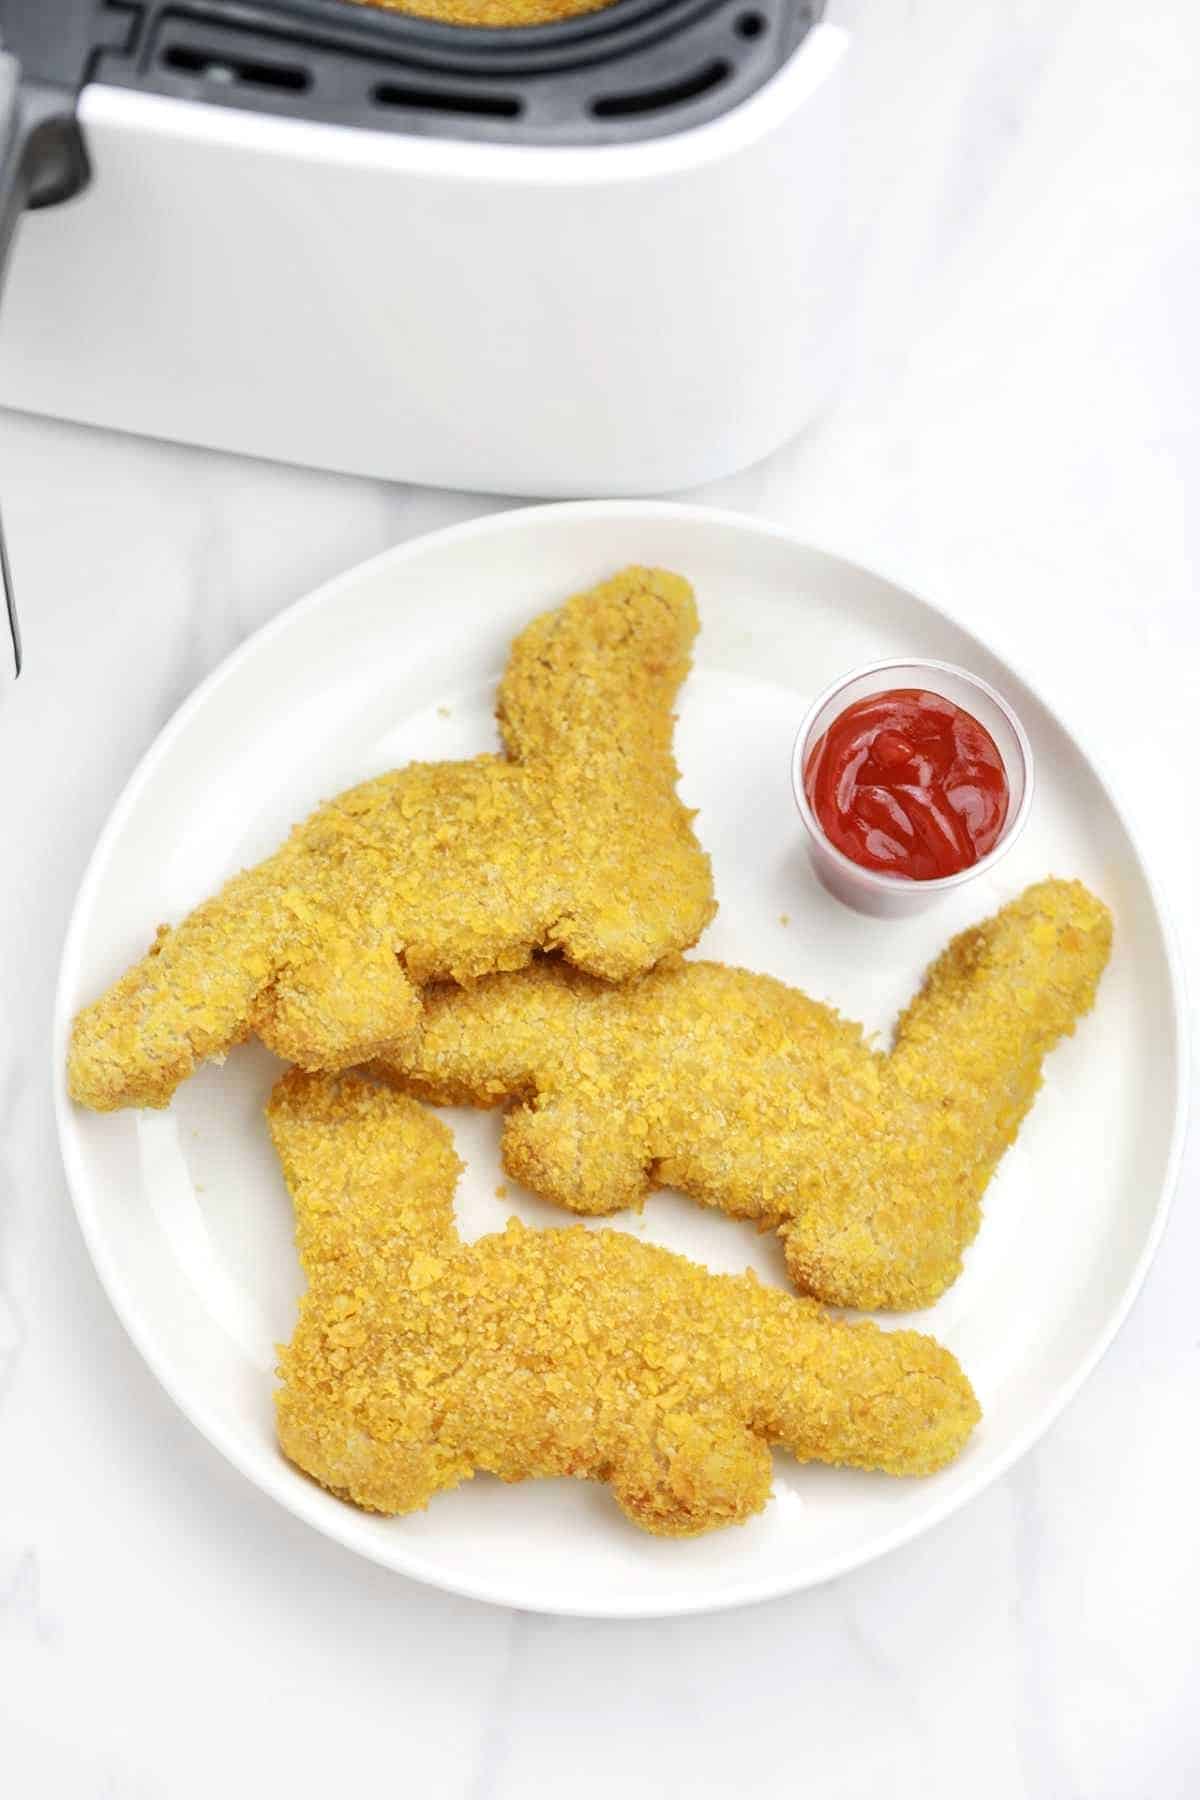 3 pieces dinosaur nuggets served on a plate with  ketchup.